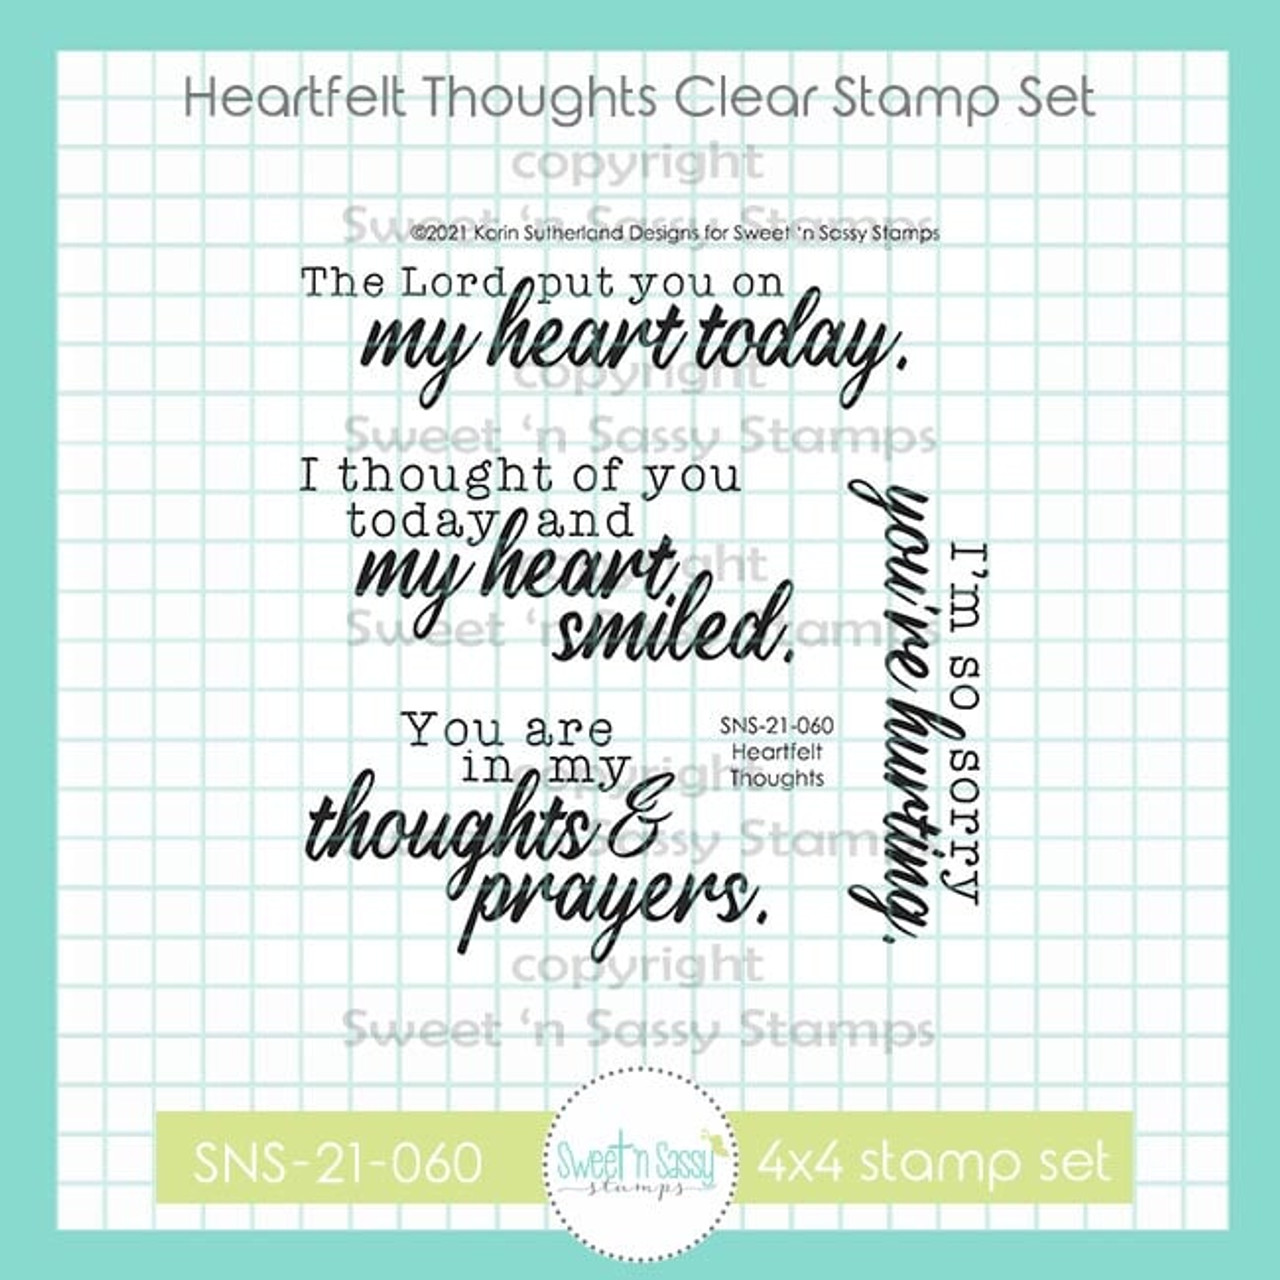 Qoiseys Never Stop Believing Clear Silicone Stamps for Card Making